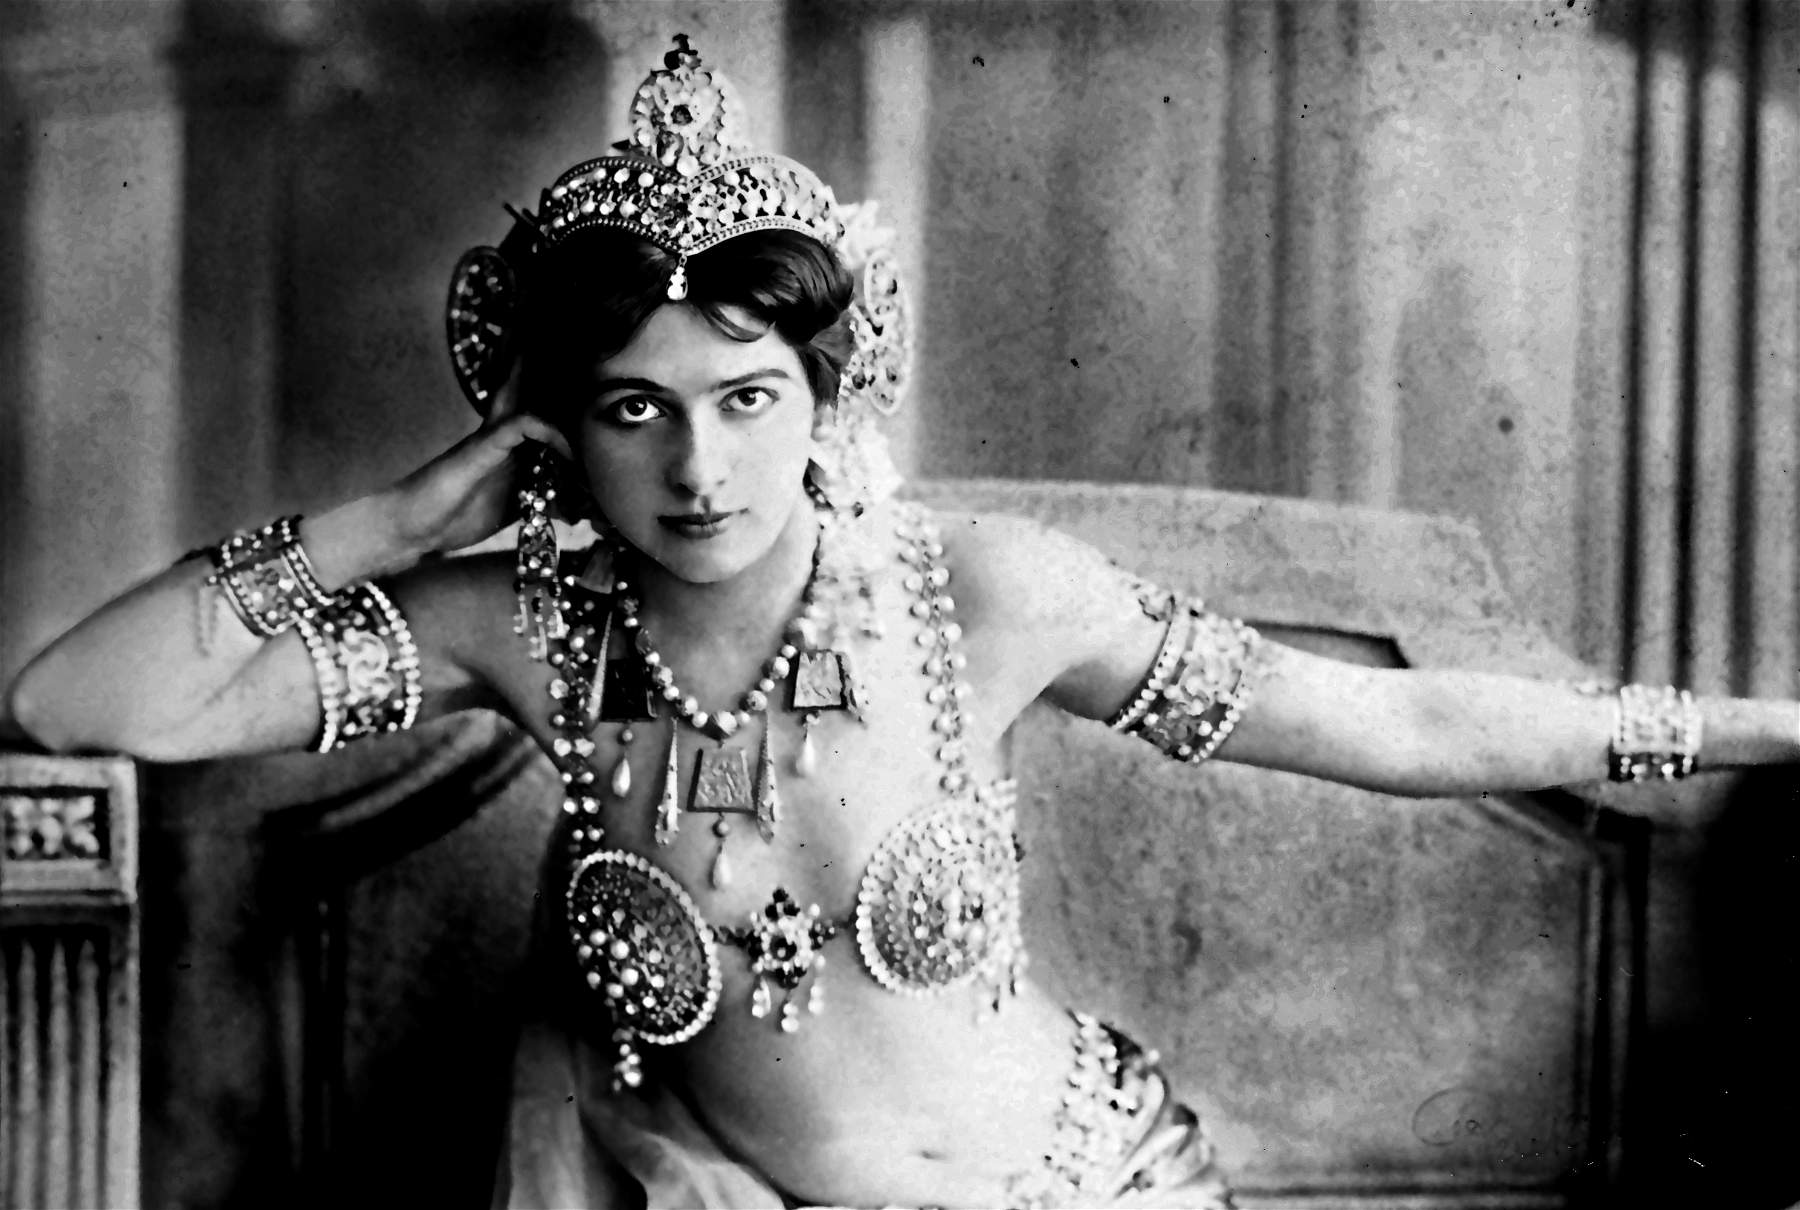 Holland has the largest ever exhibition on Mata Hari